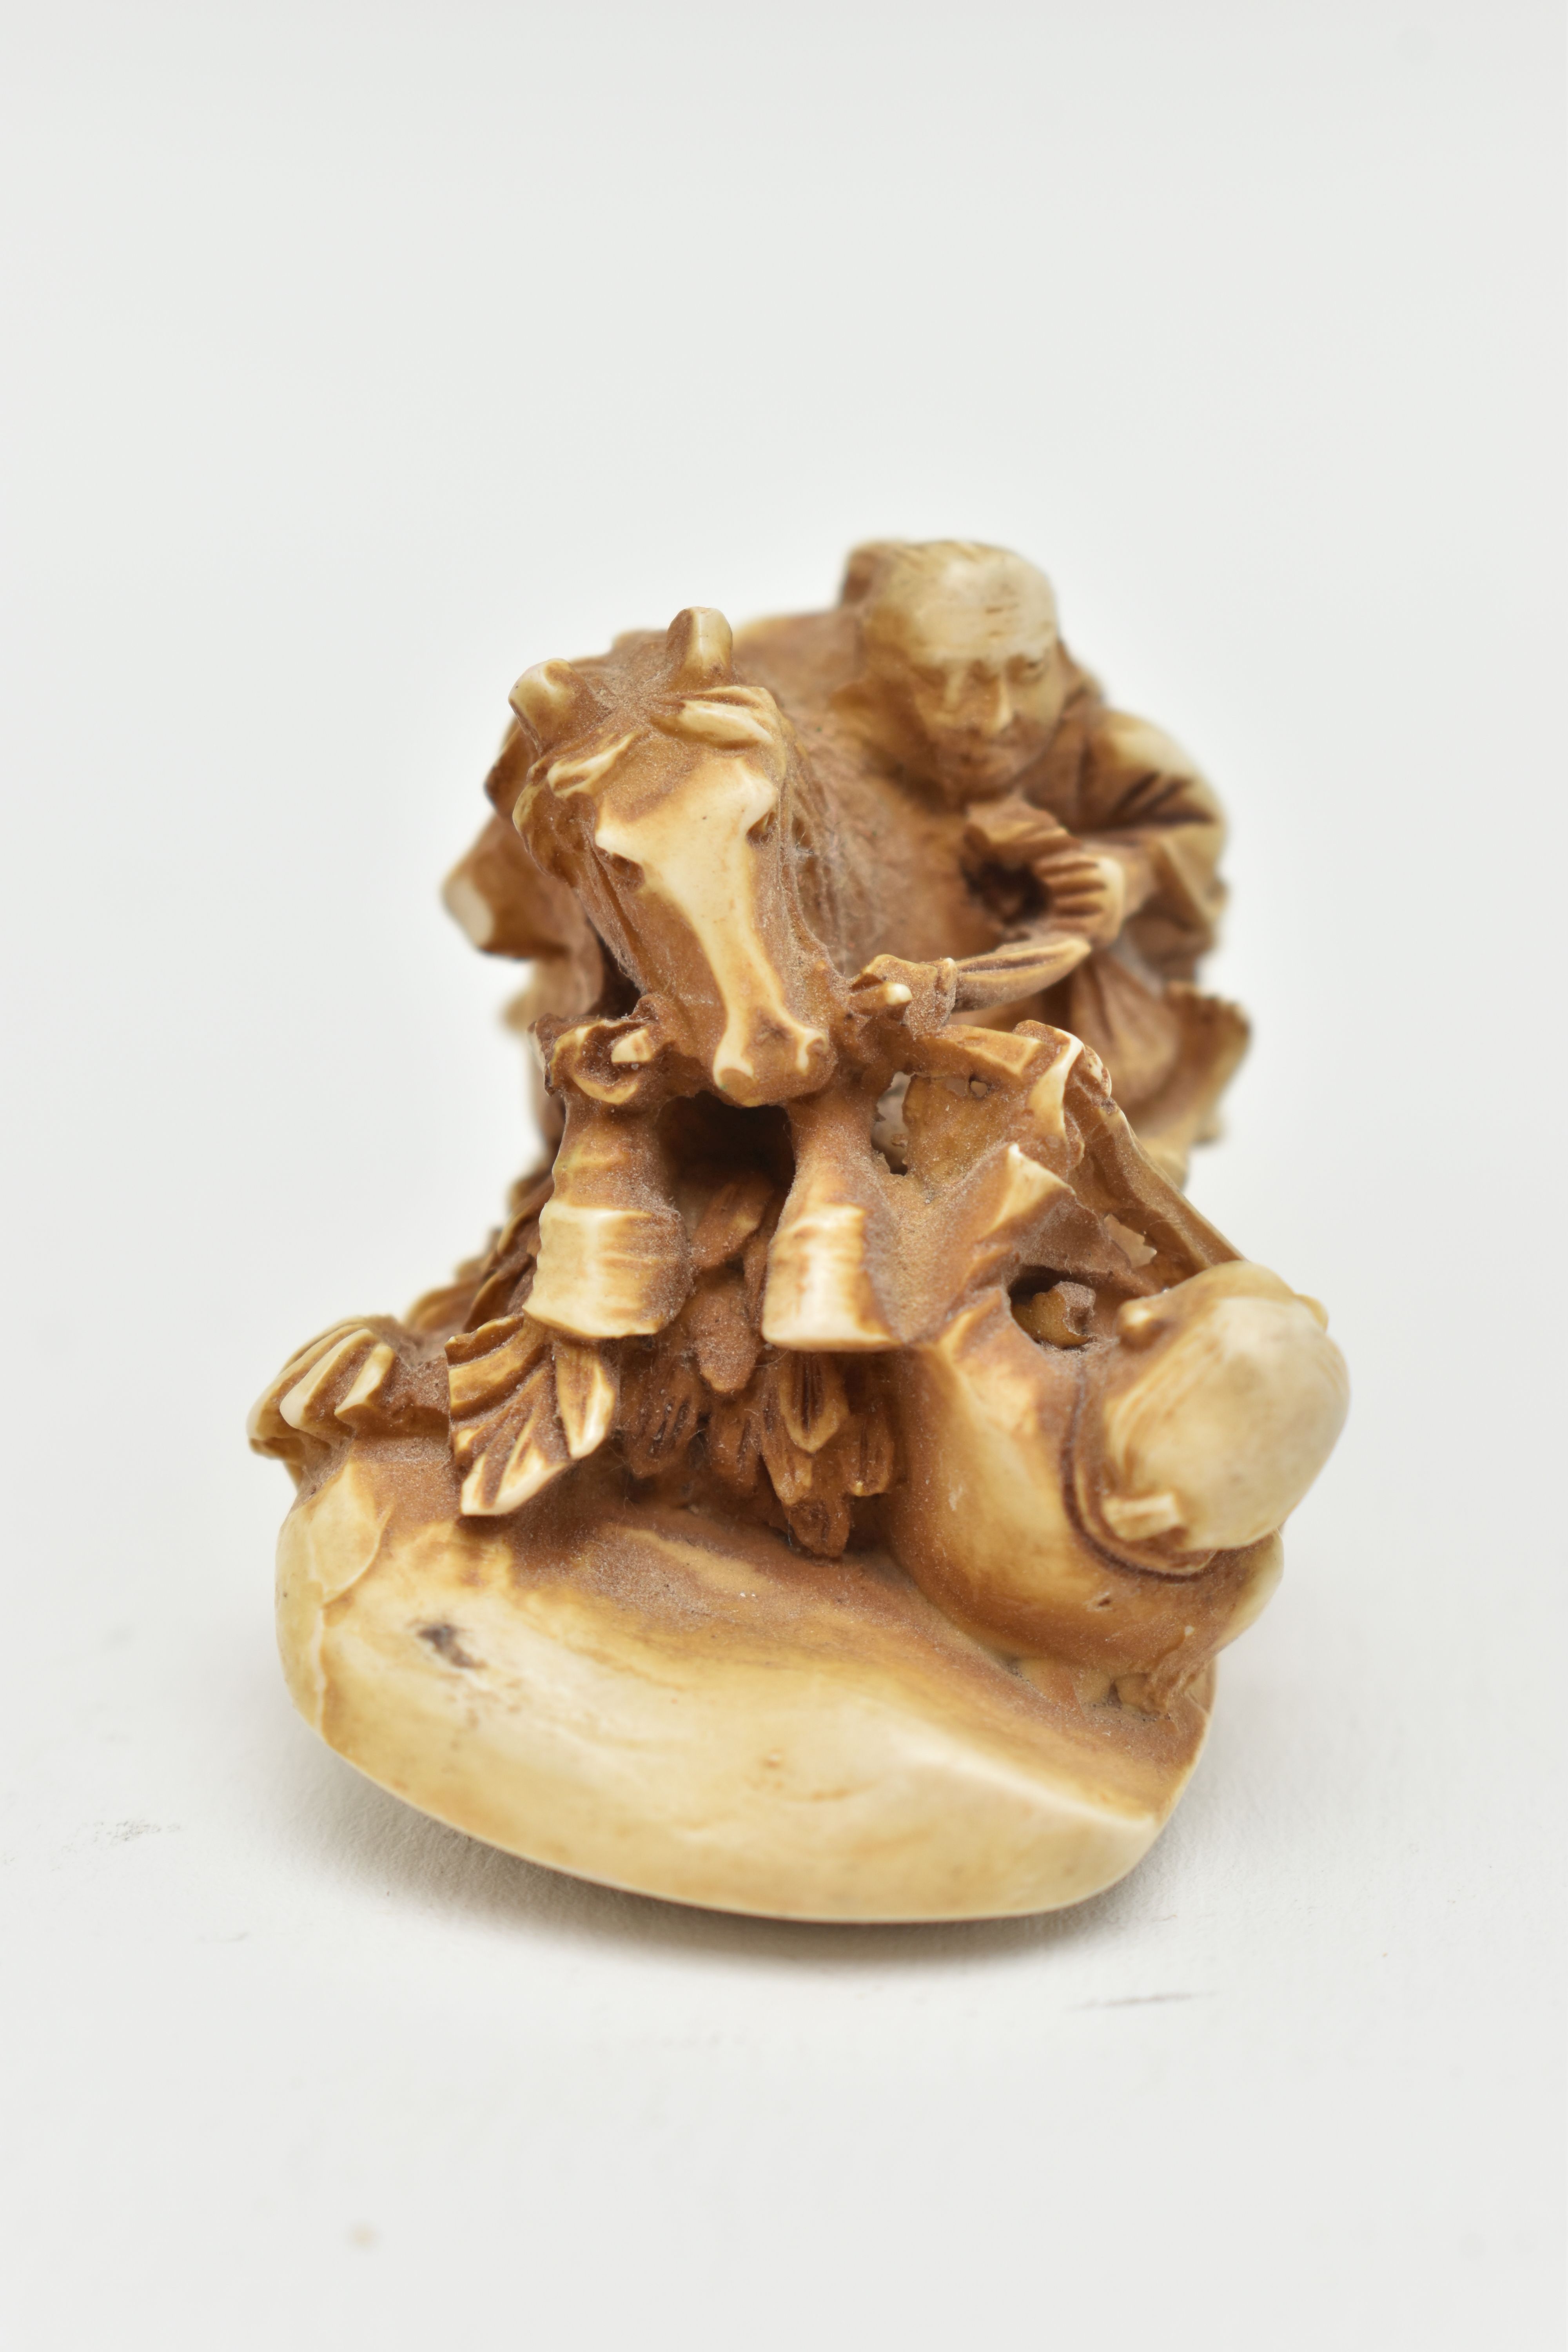 A BONE OKIMONO, a carved ornament depicting a man on a horse over a fallen down man, approximate - Image 2 of 7